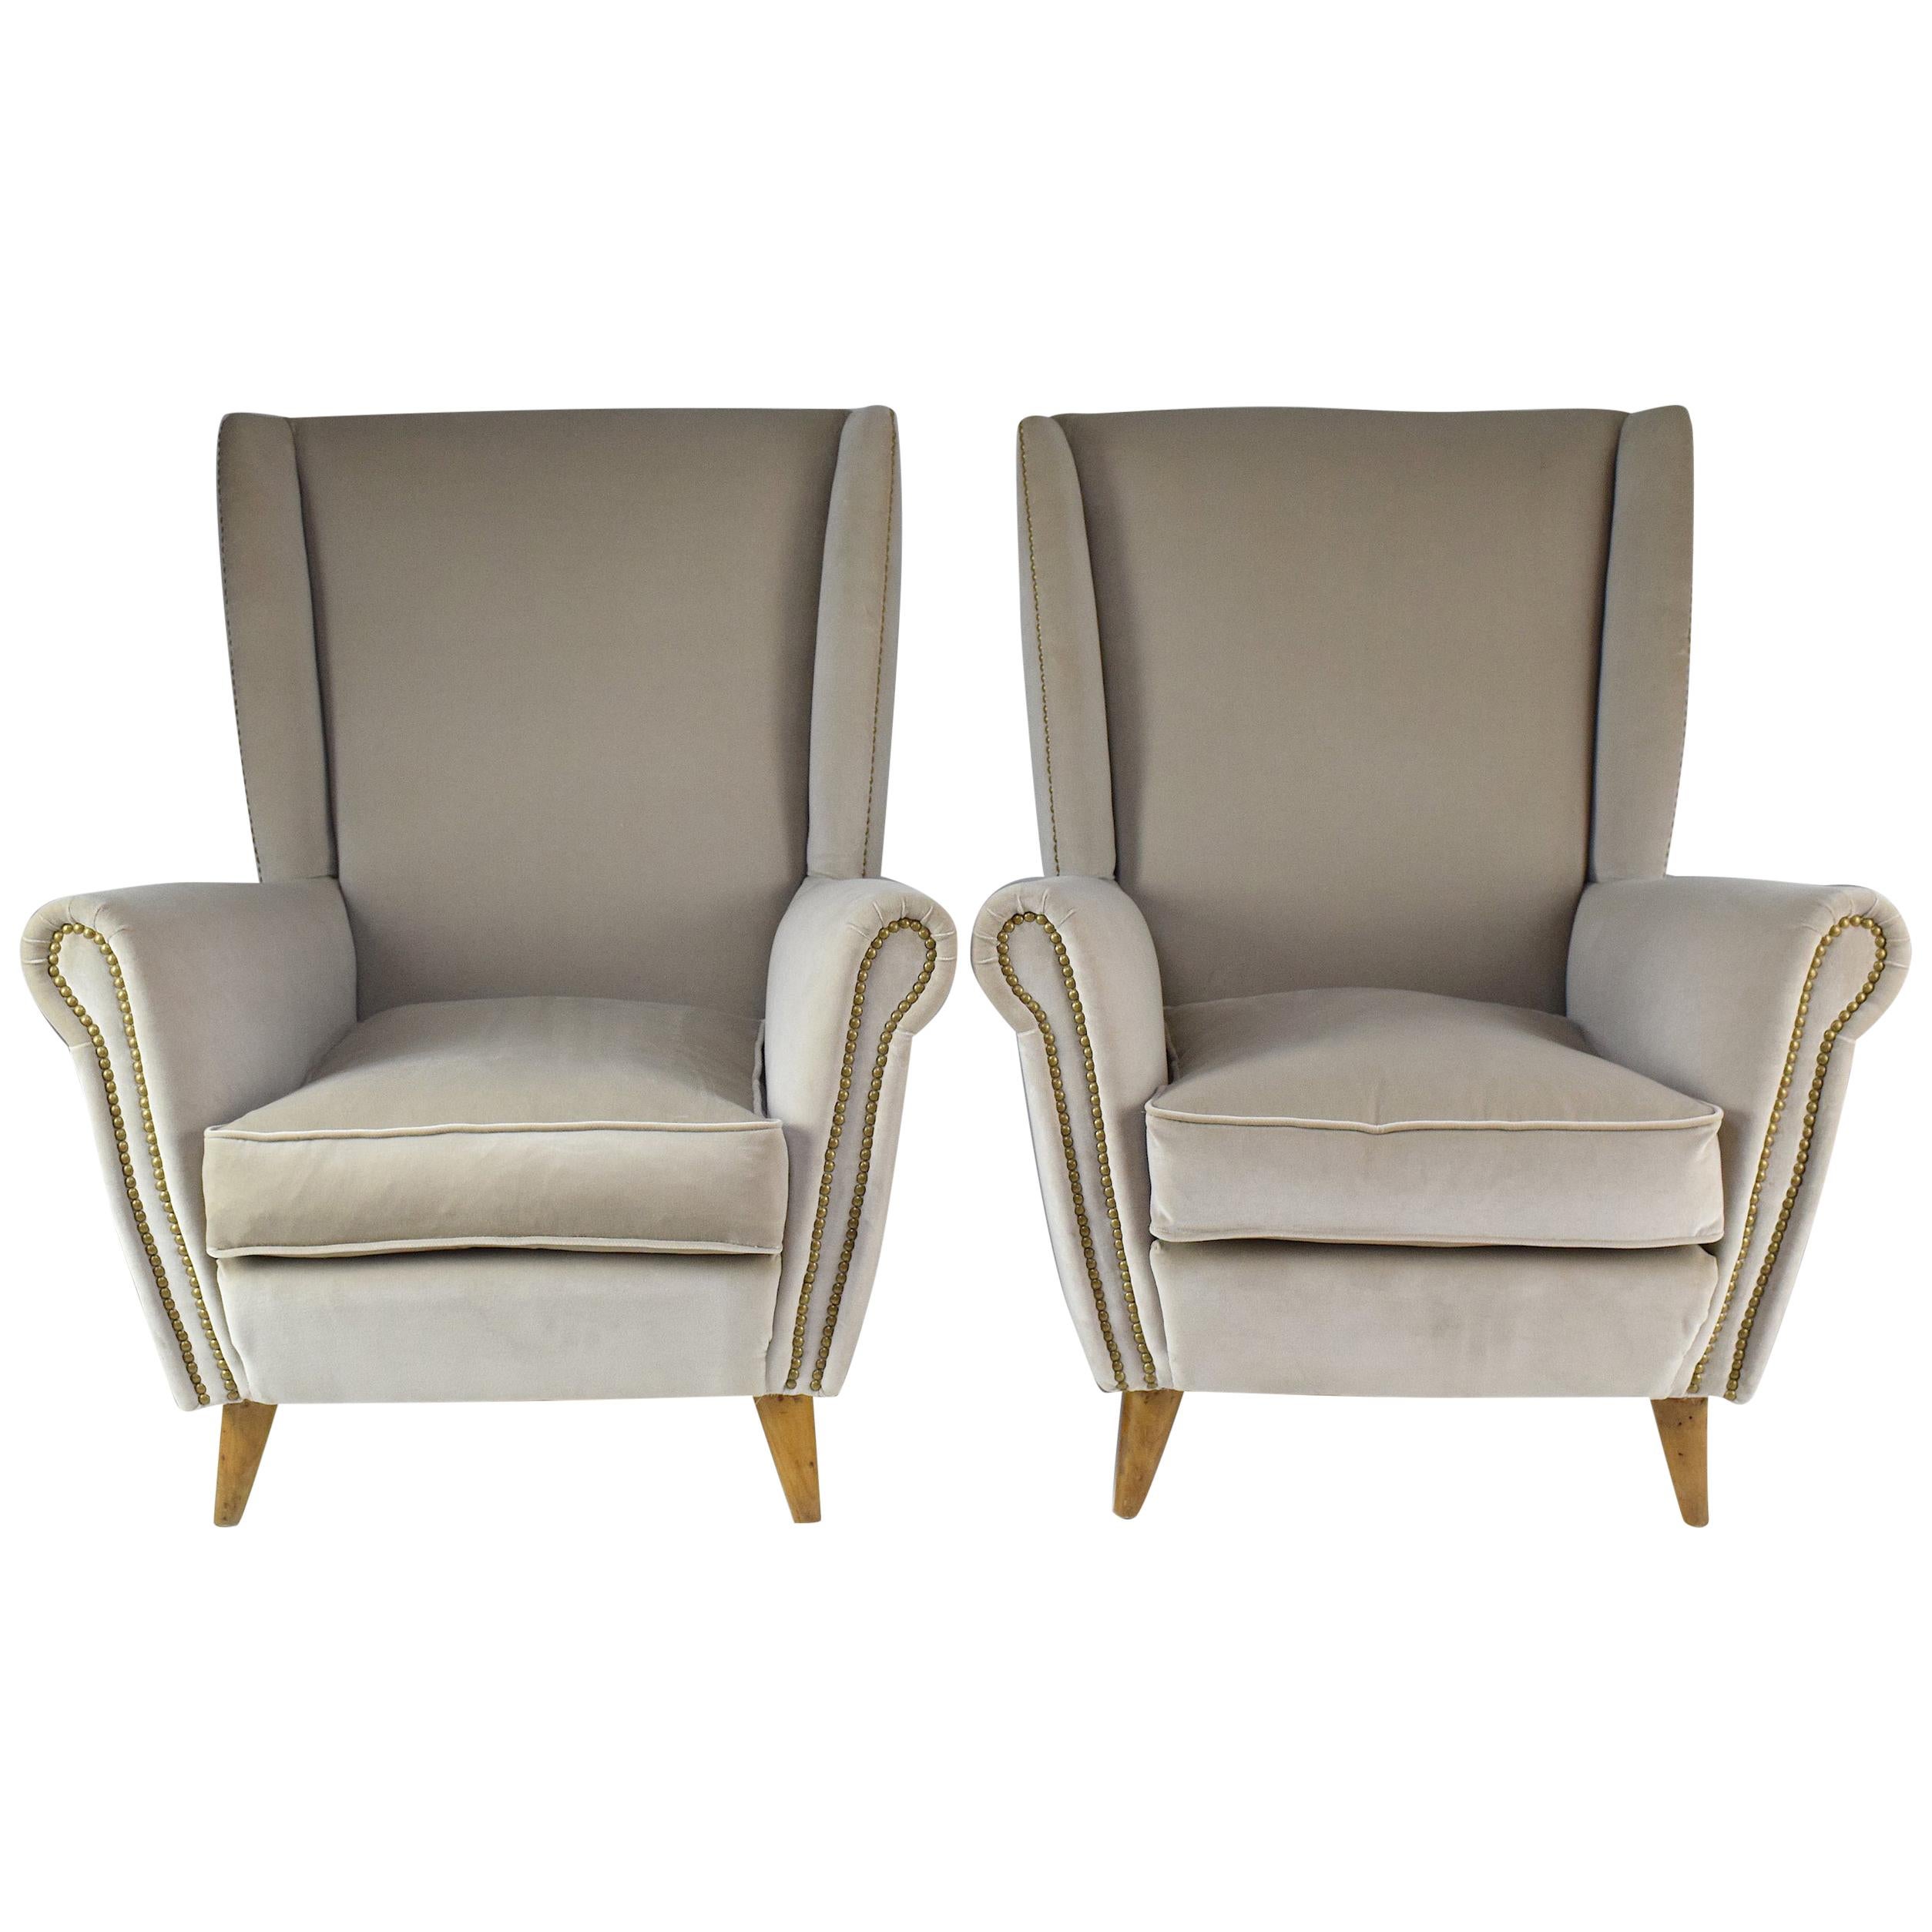 Pair of 20th Century Armchairs by Gio Ponti, 1940s For Sale